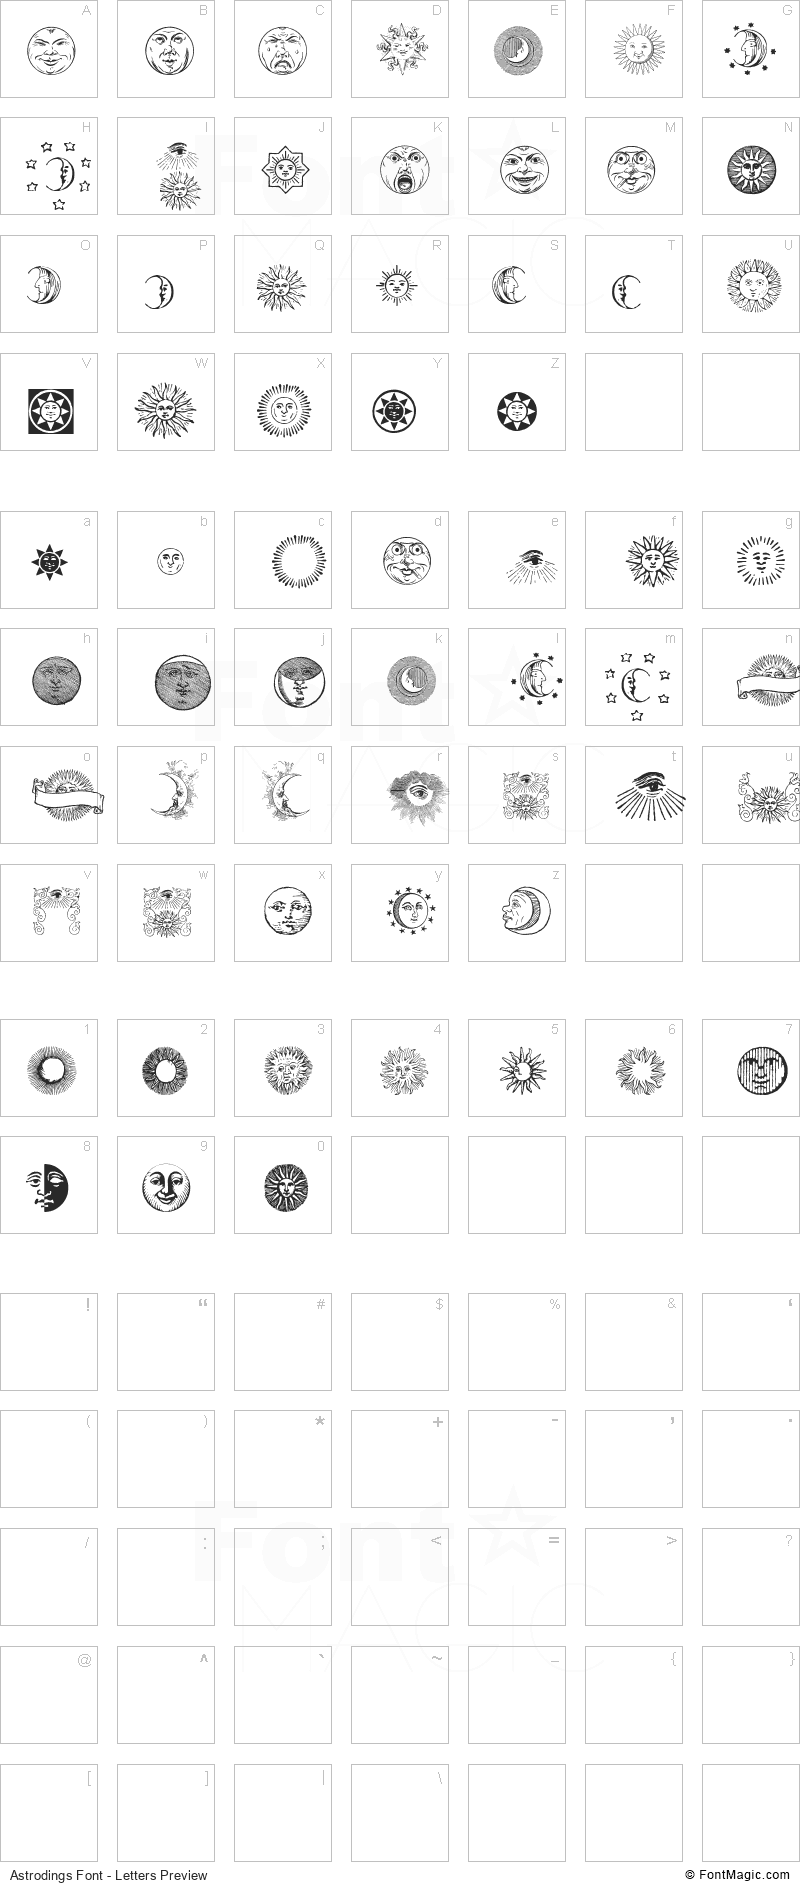 Astrodings Font - All Latters Preview Chart